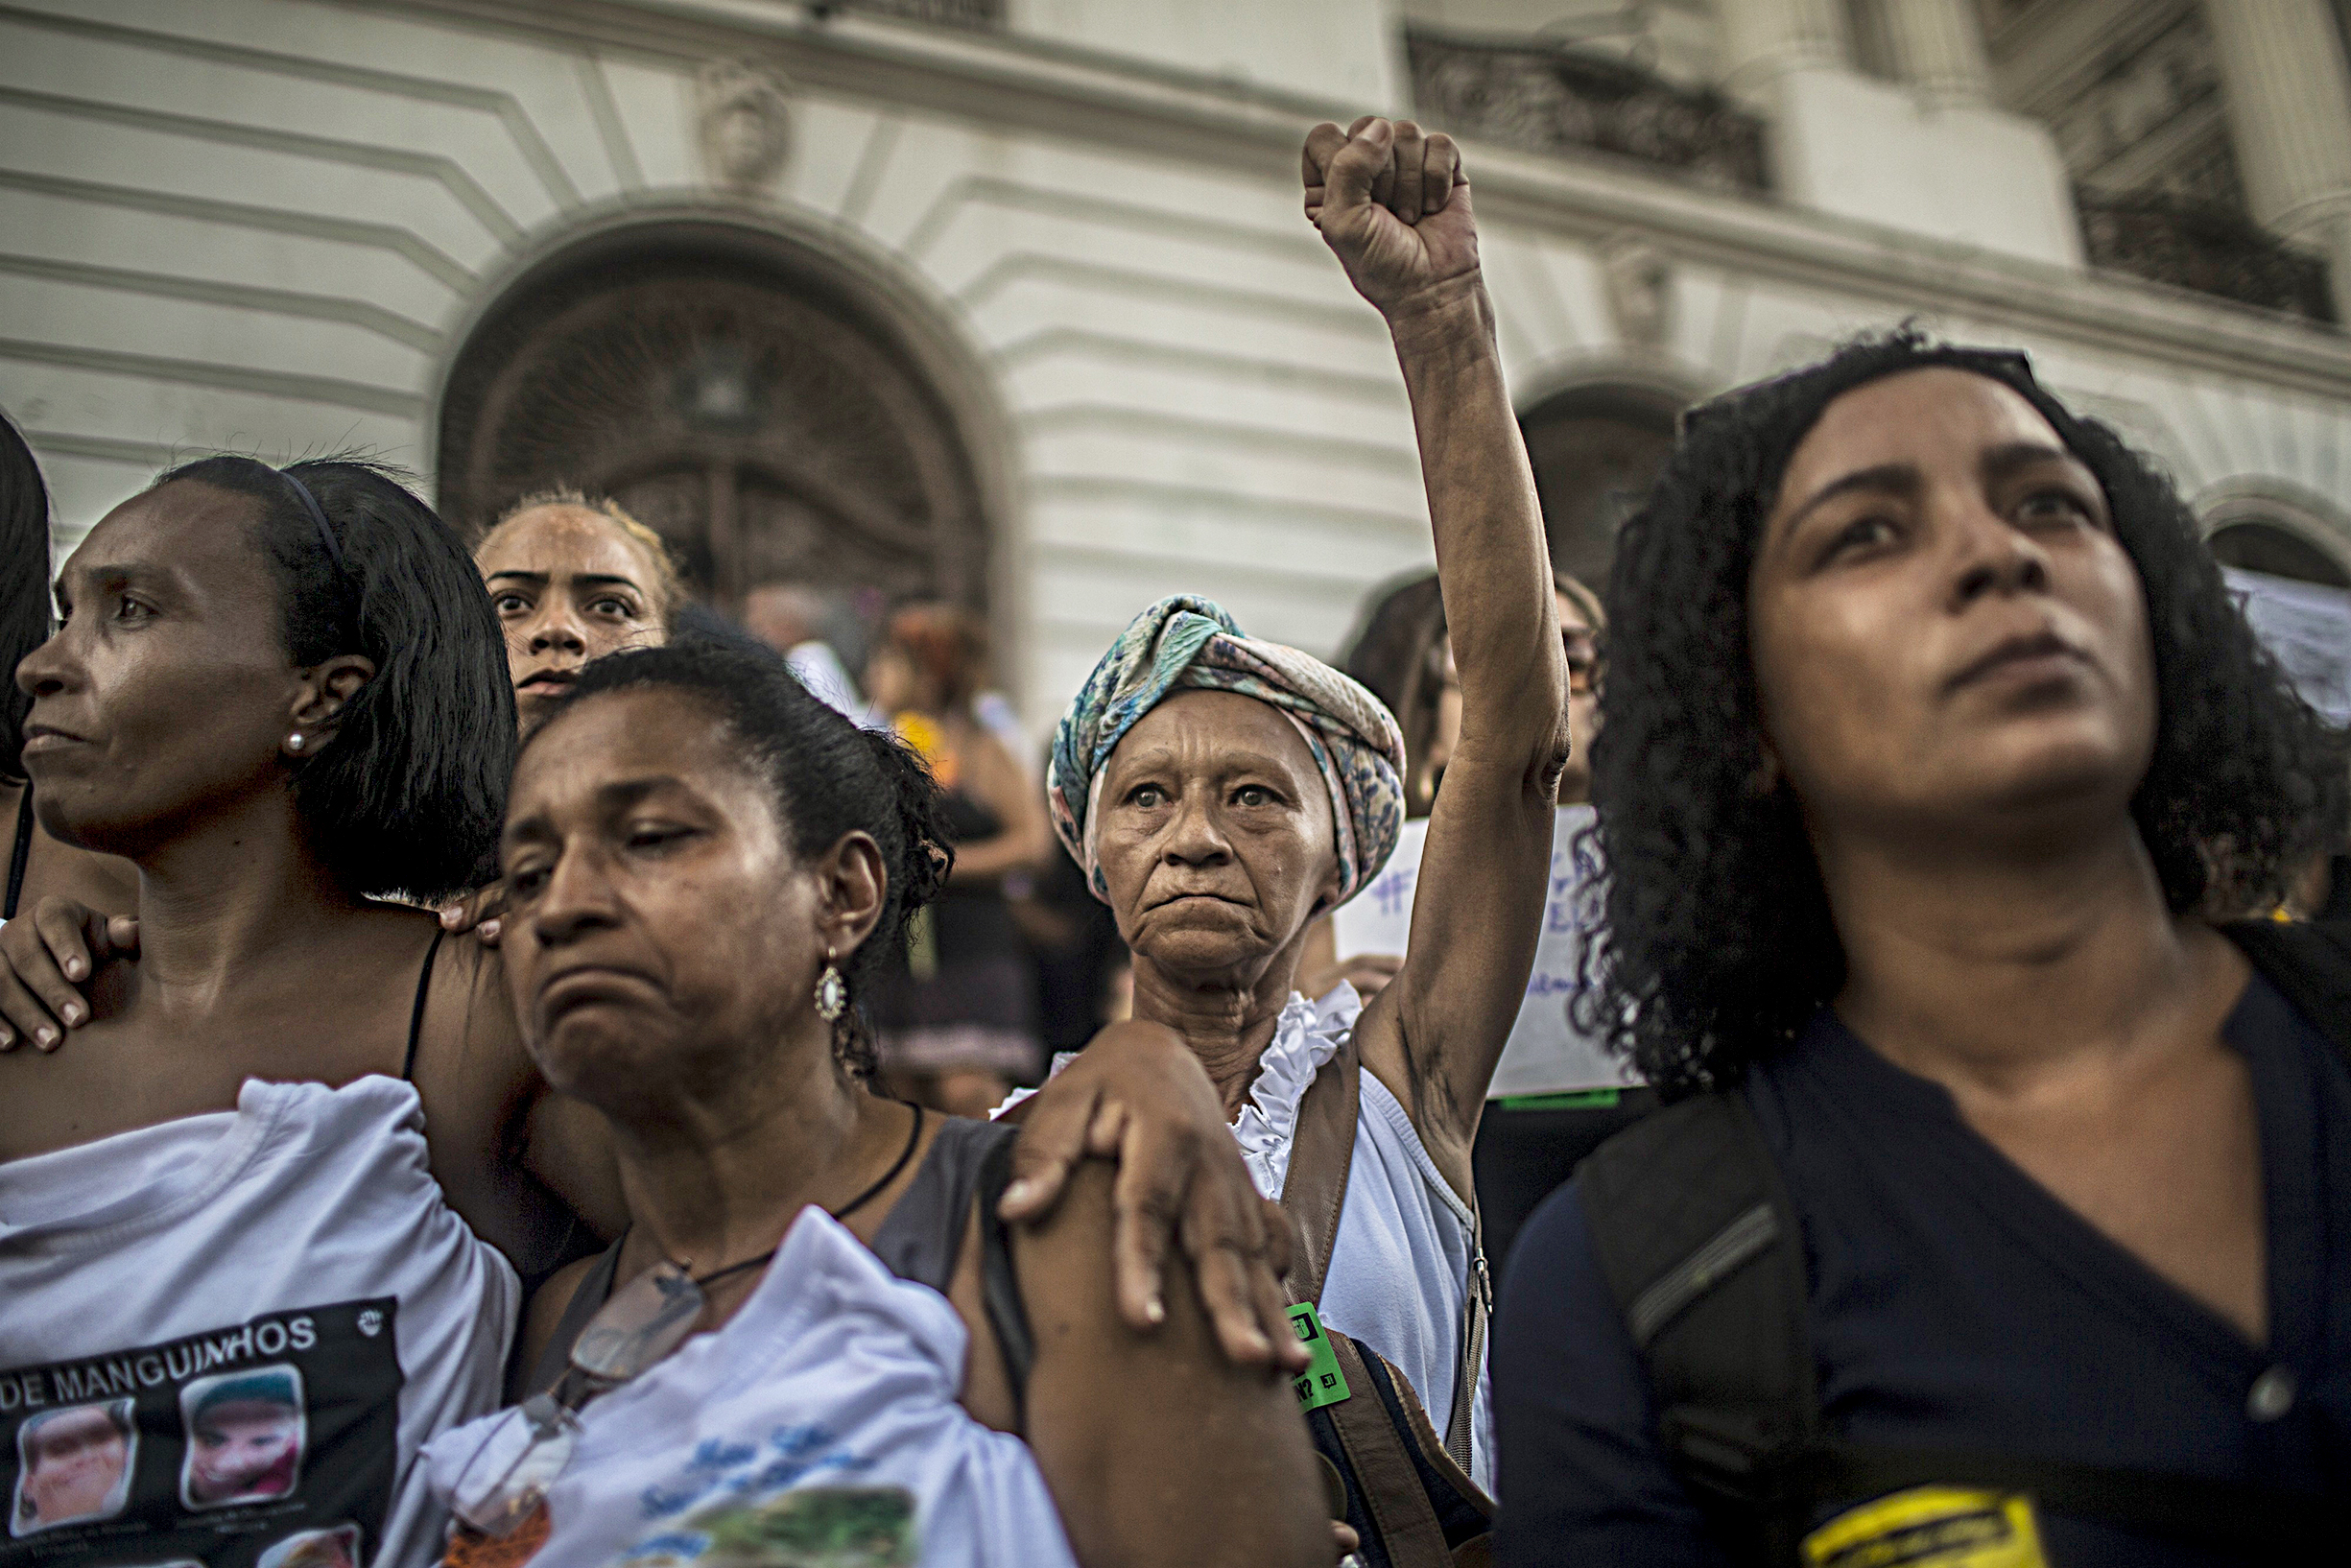 Crowds react as the coffin of fast-rising politician Marielle Franco is carried by in Rio de Janeiro (Dado Galdieri—Bloomberg/Getty Images)